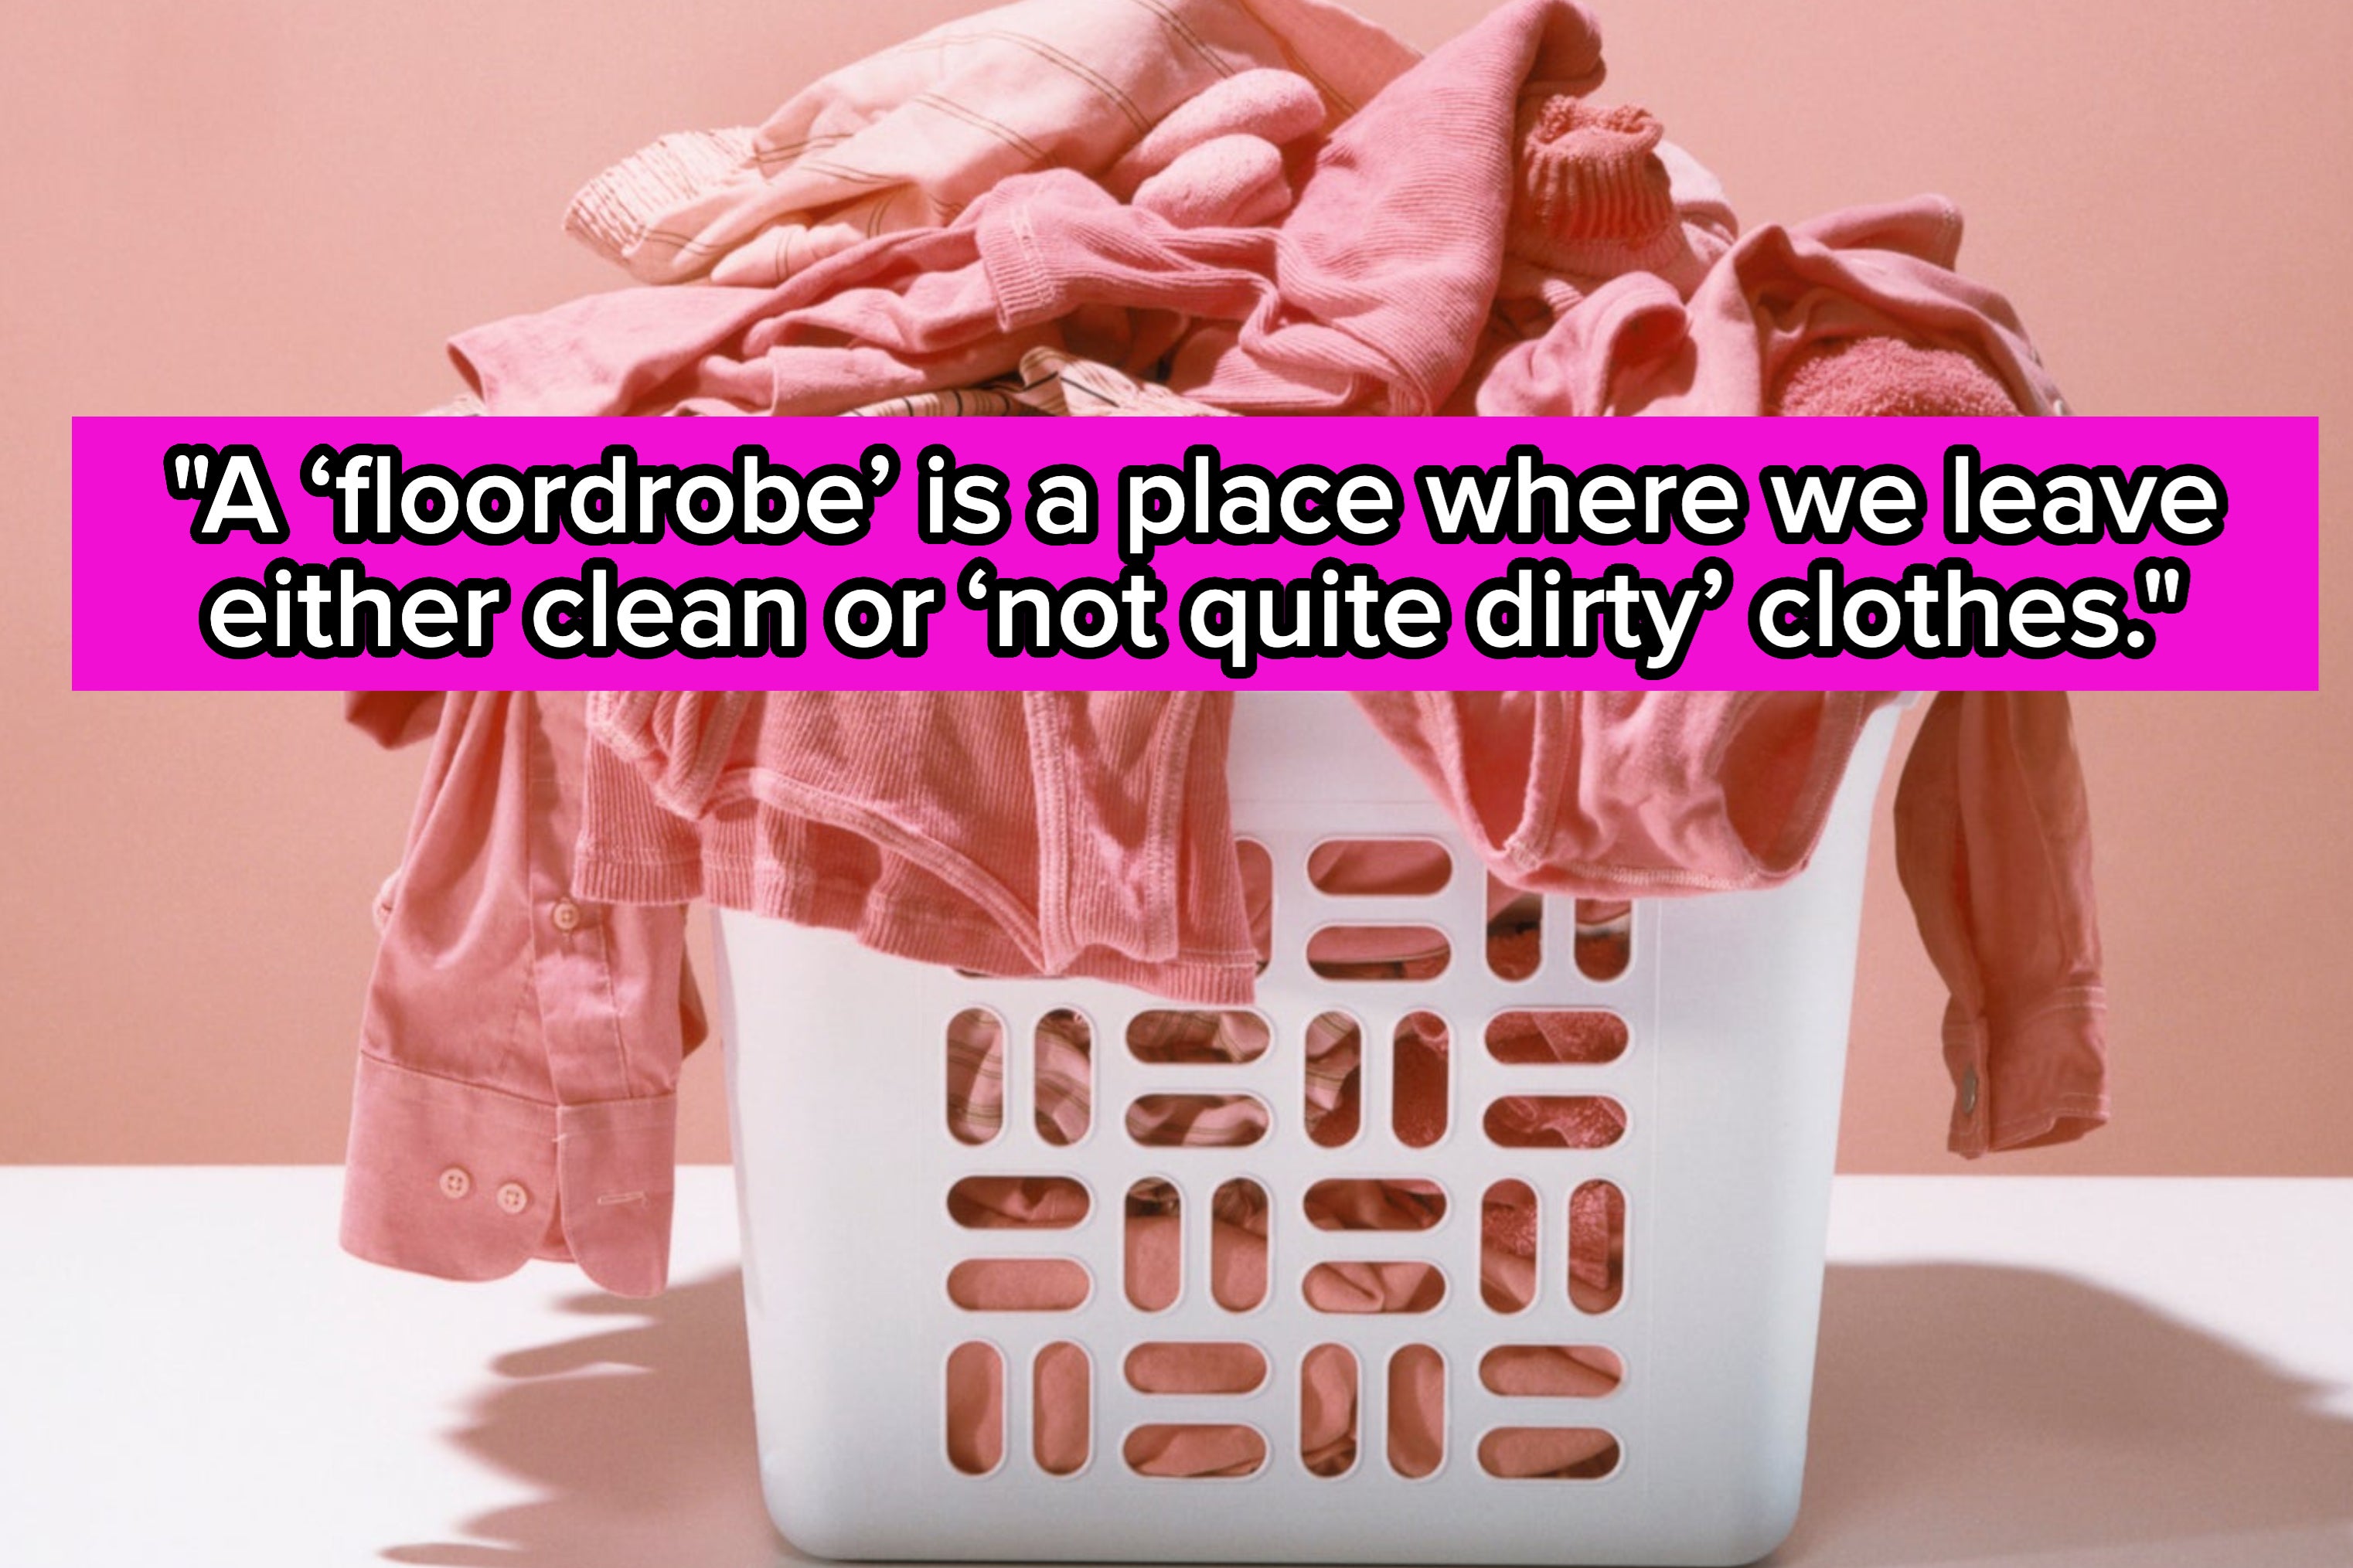 Experts Say This Unexpected Laundry Habit Is A Potential Sign Of ADHD